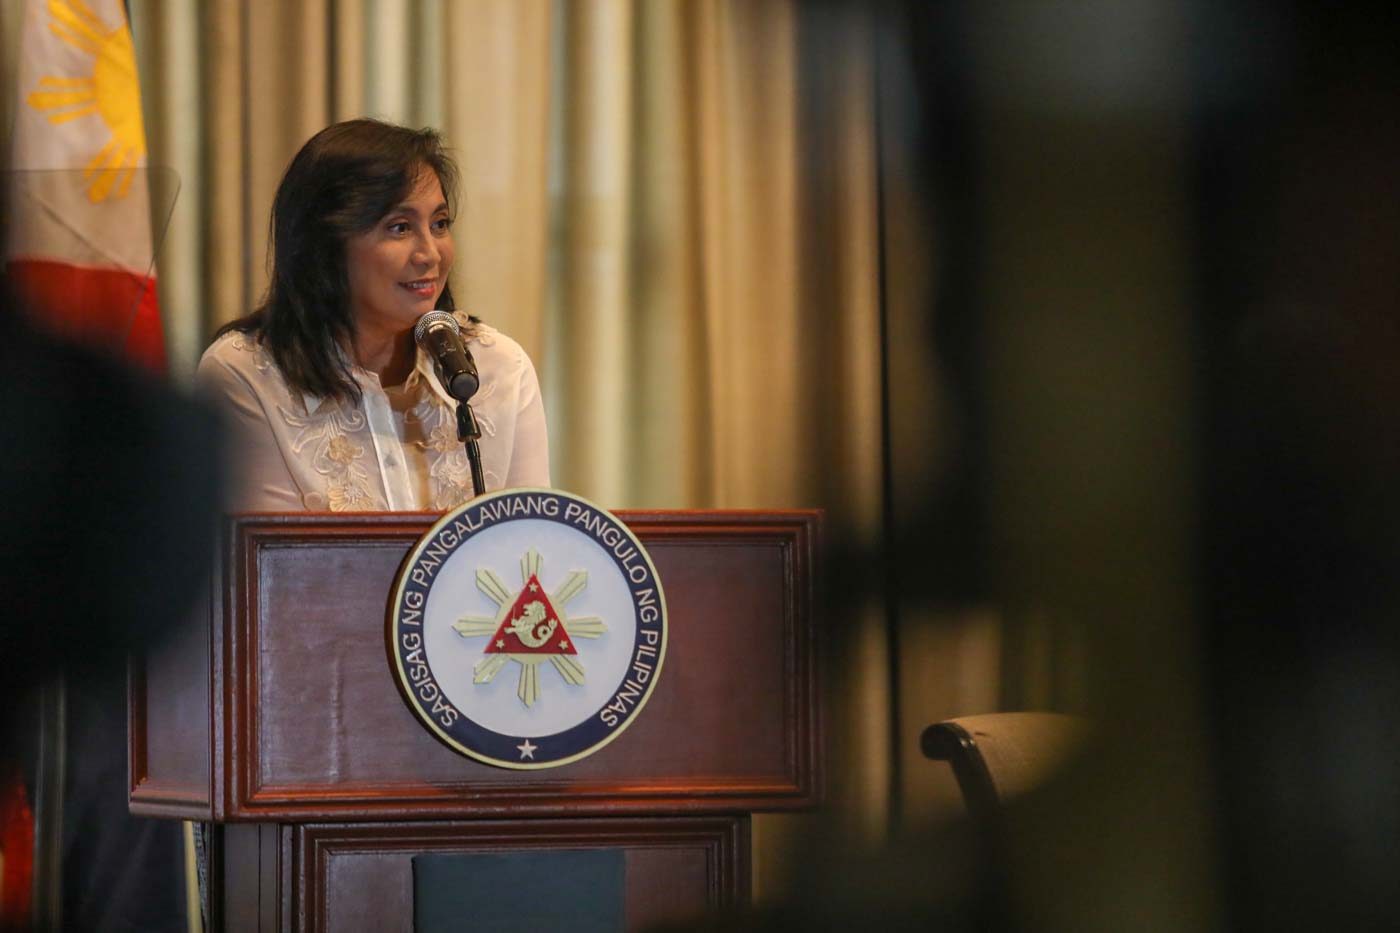 Women supporters’ 2022 pitch for Robredo: She can lead ‘just, gender-equal’ PH